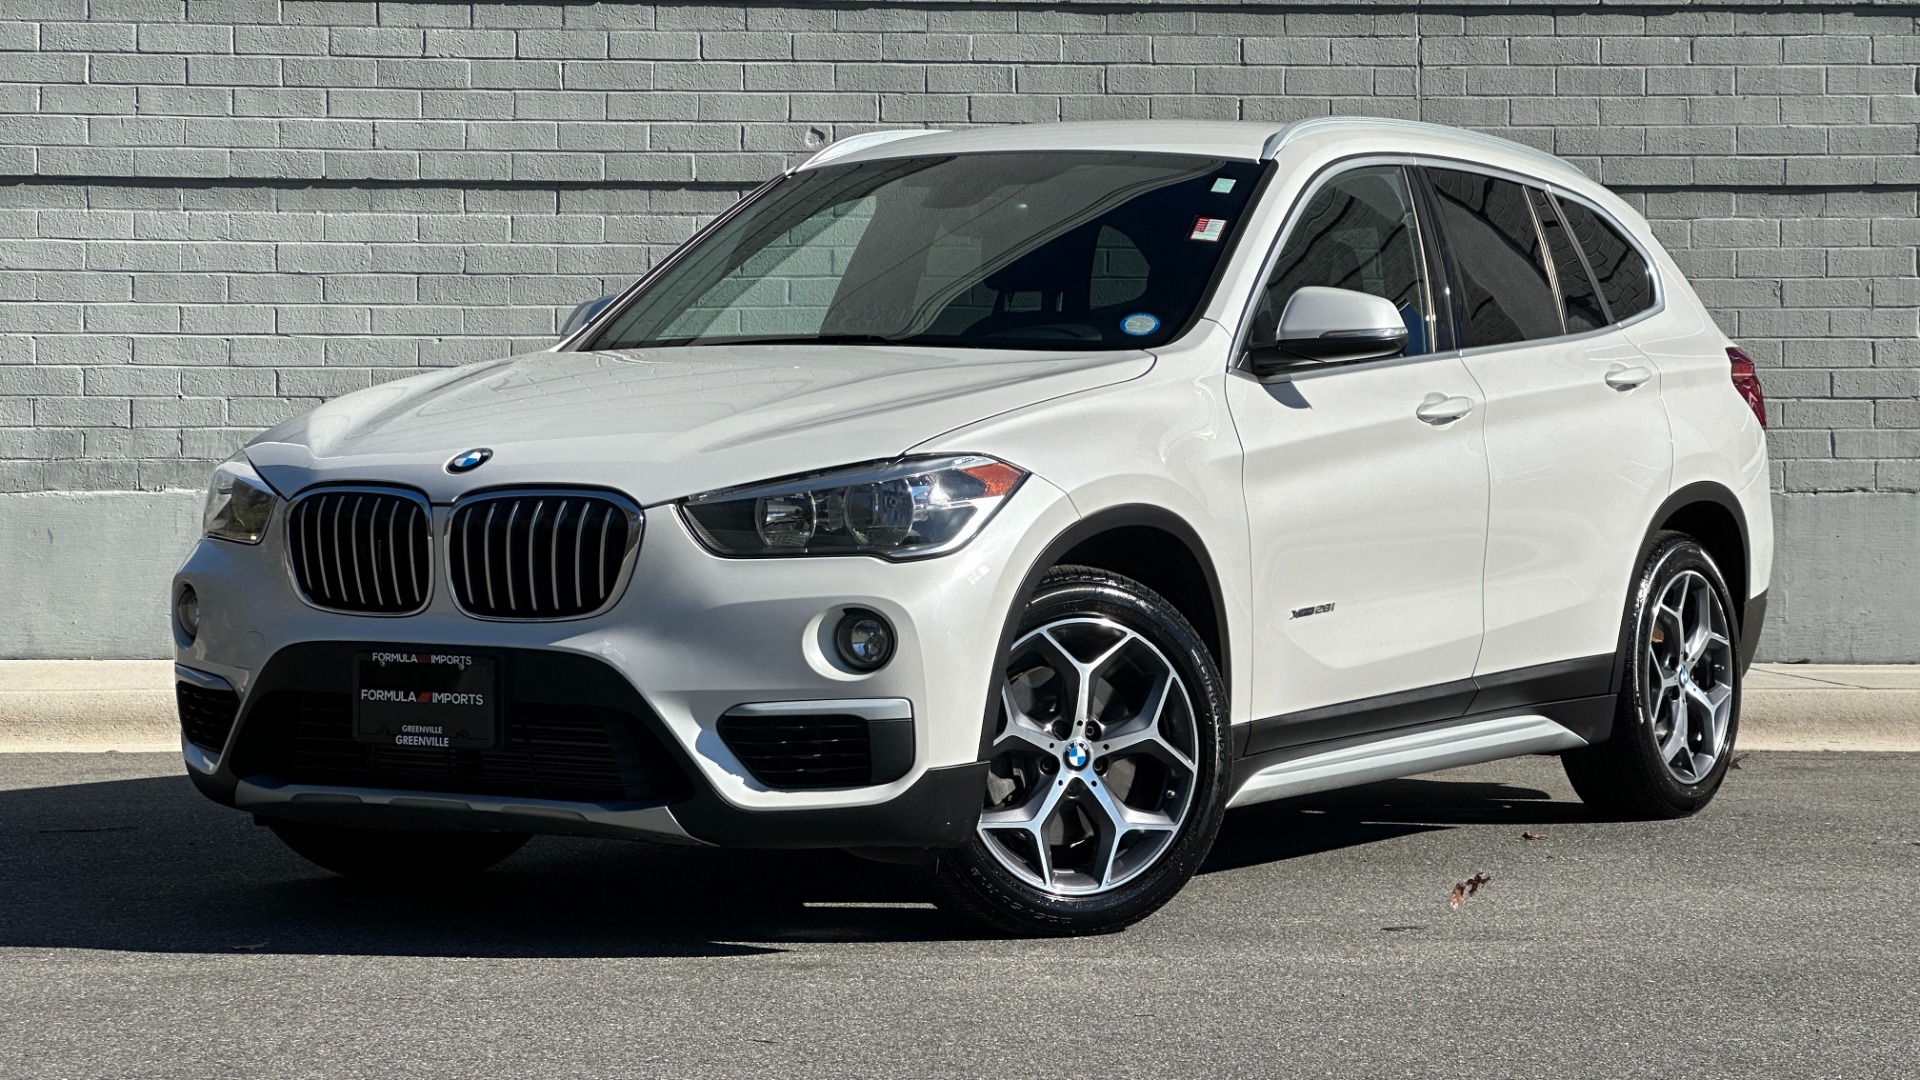 Used 2018 BMW X1 xDrive28i / DAKOTA LEATHER INTERIOR / HEATED STEERING / HEATED SEATS / NAVI for sale Sold at Formula Imports in Charlotte NC 28227 1